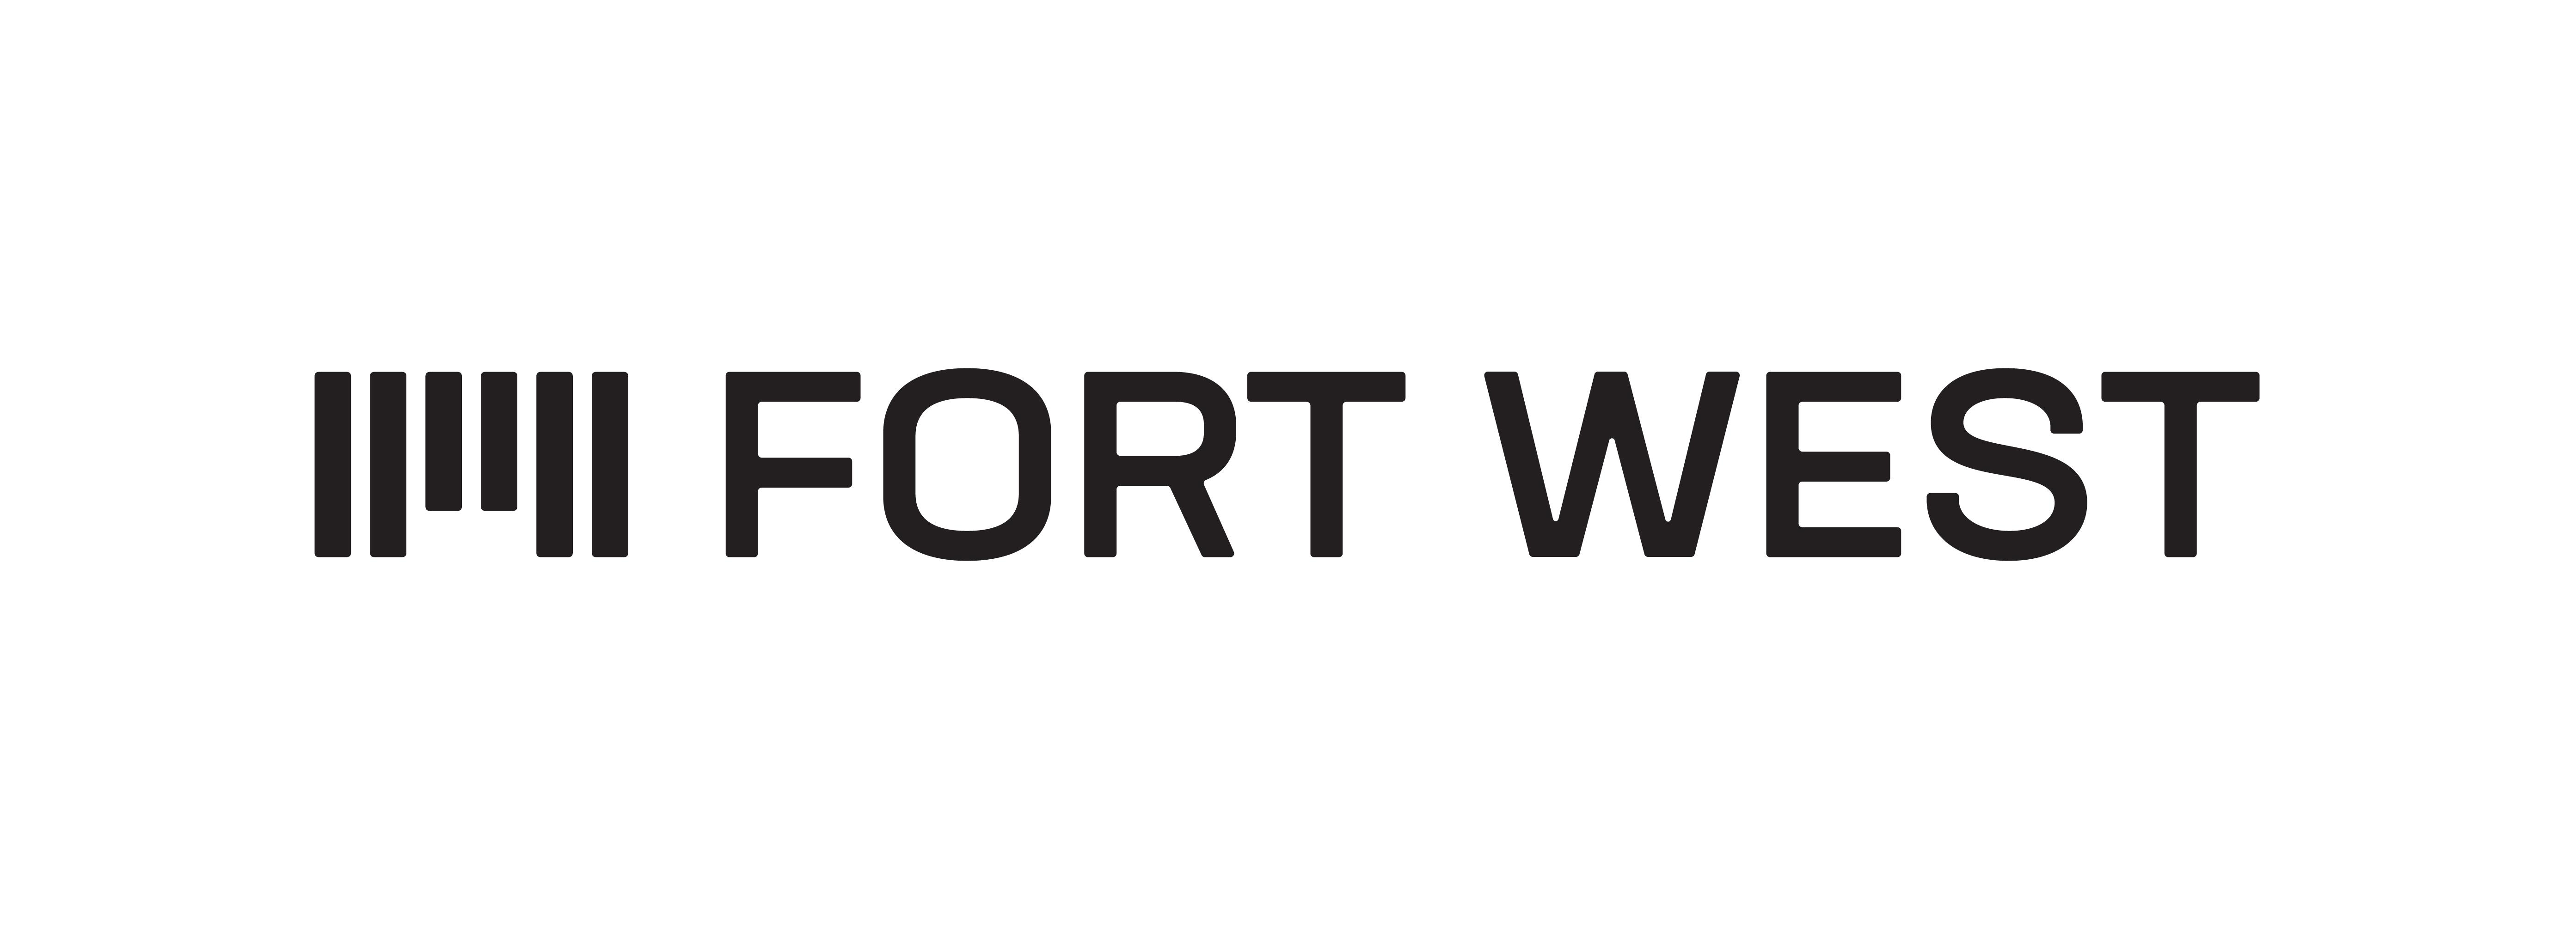 Fort West